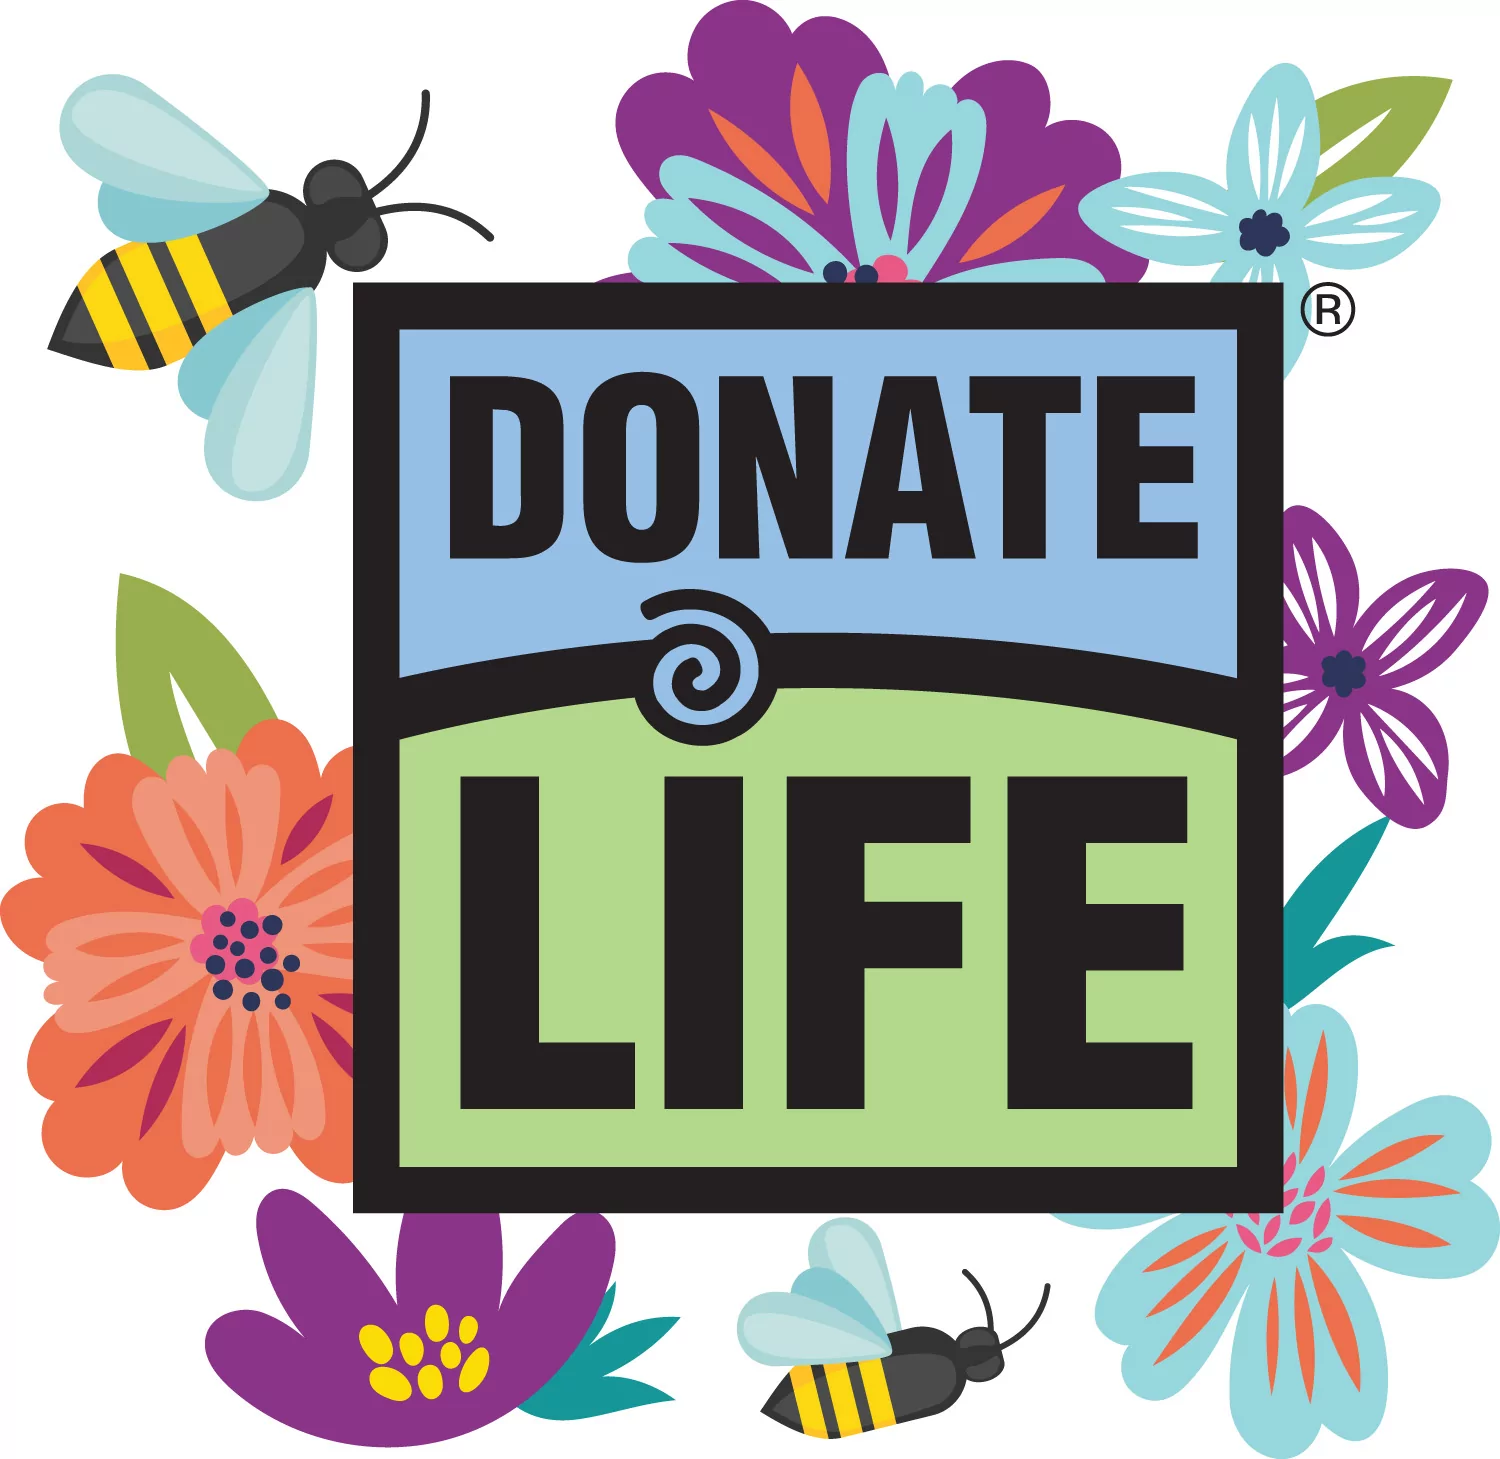 Donate Life logo surrounded by flowers and bees